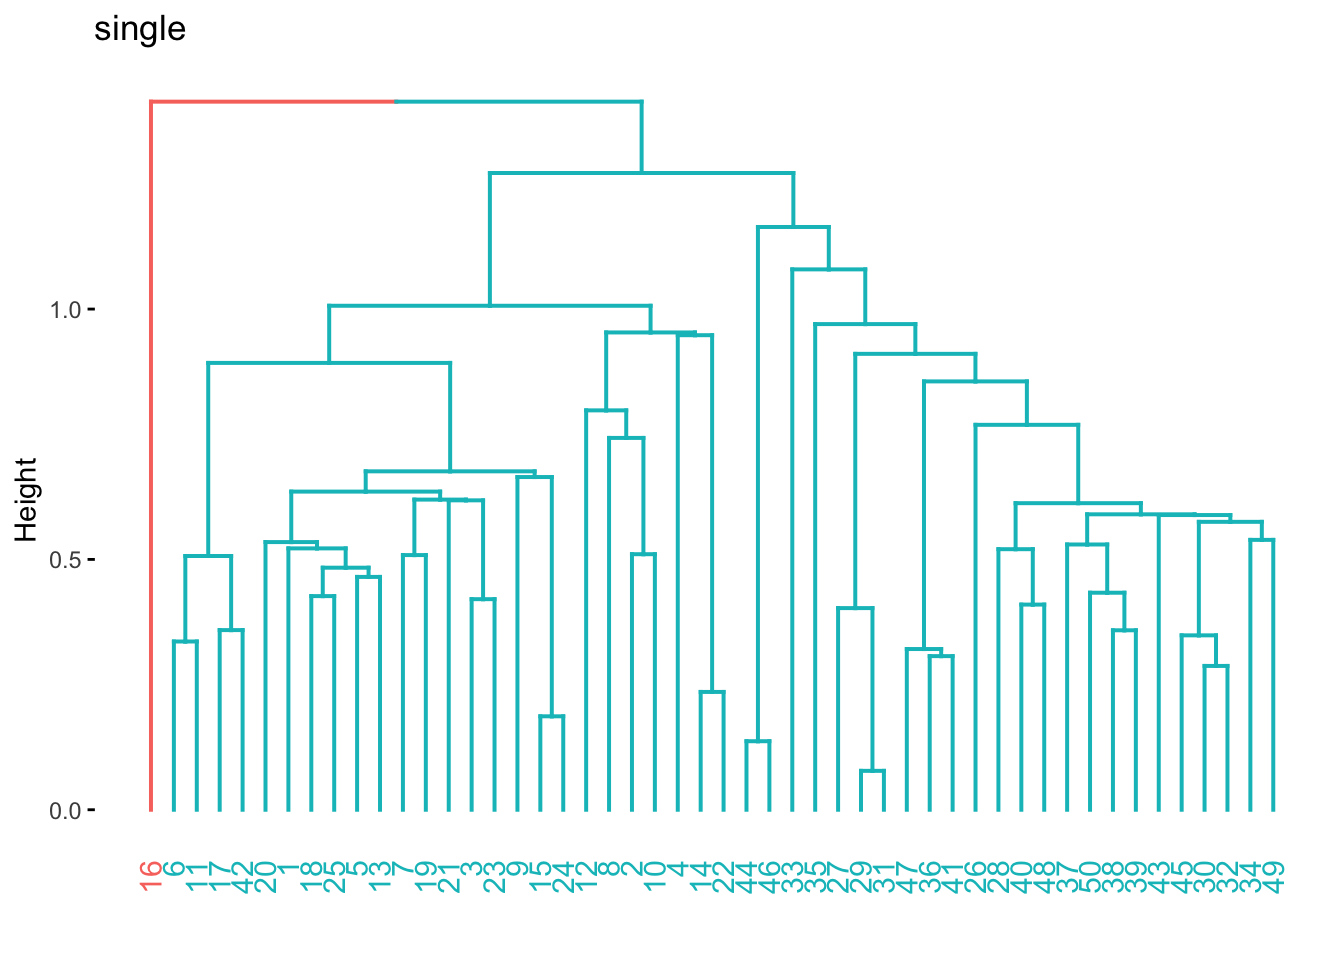 Dendrogram visualization. Left side has 1 leaf and the right side contain the remaining leaves.